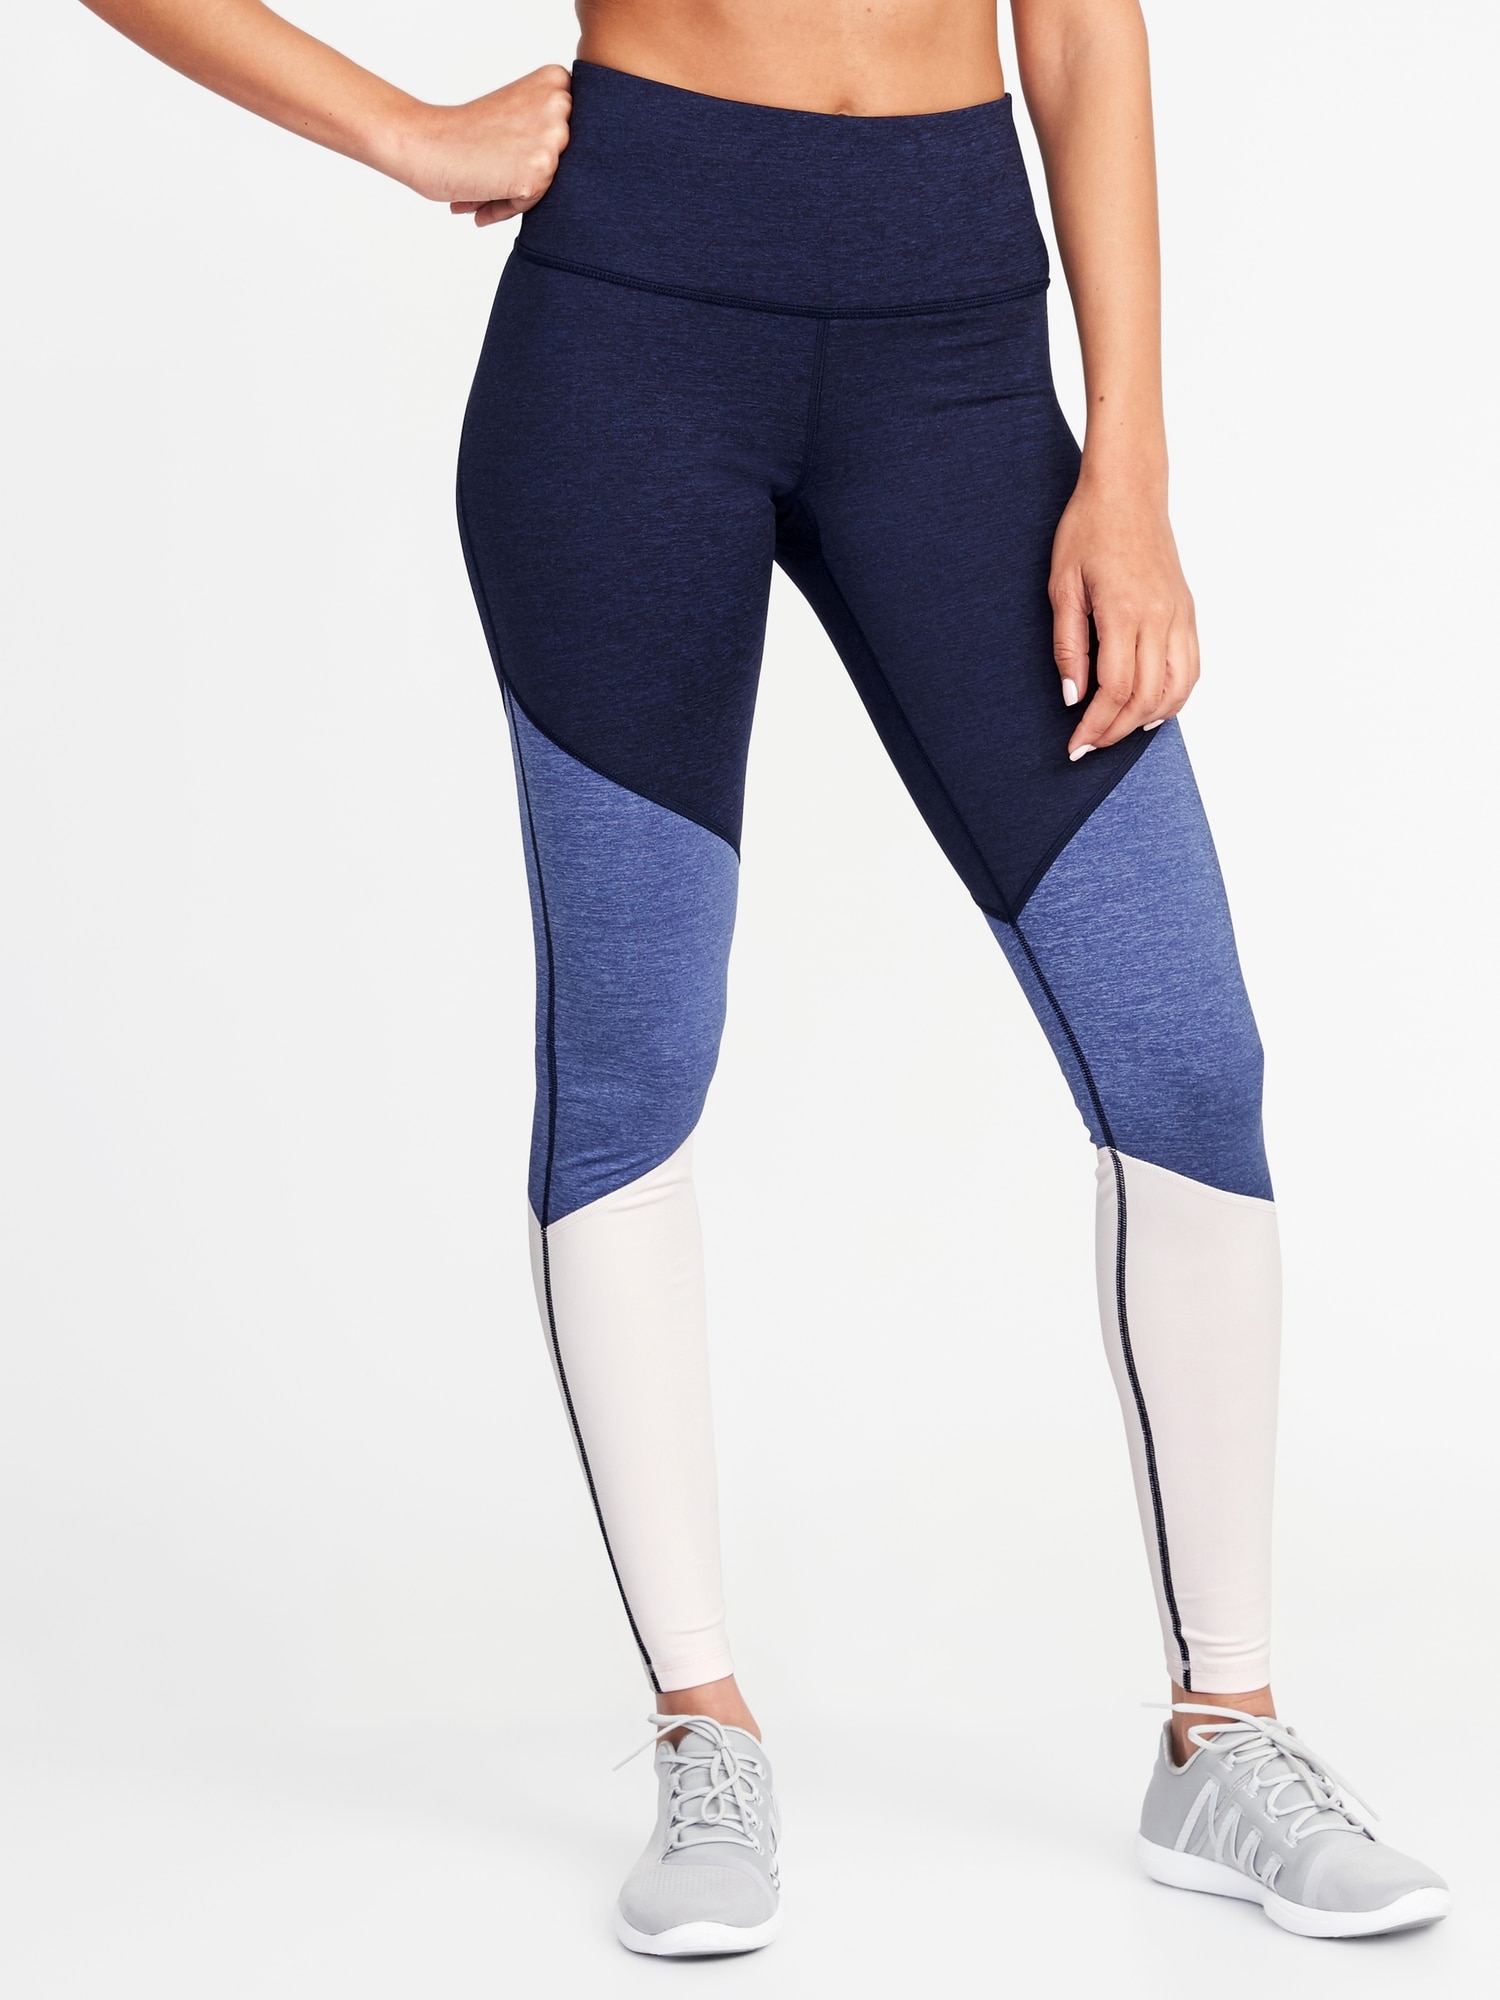 Heads up, Fit Fam: $12 Old Navy Compression Leggings in-store